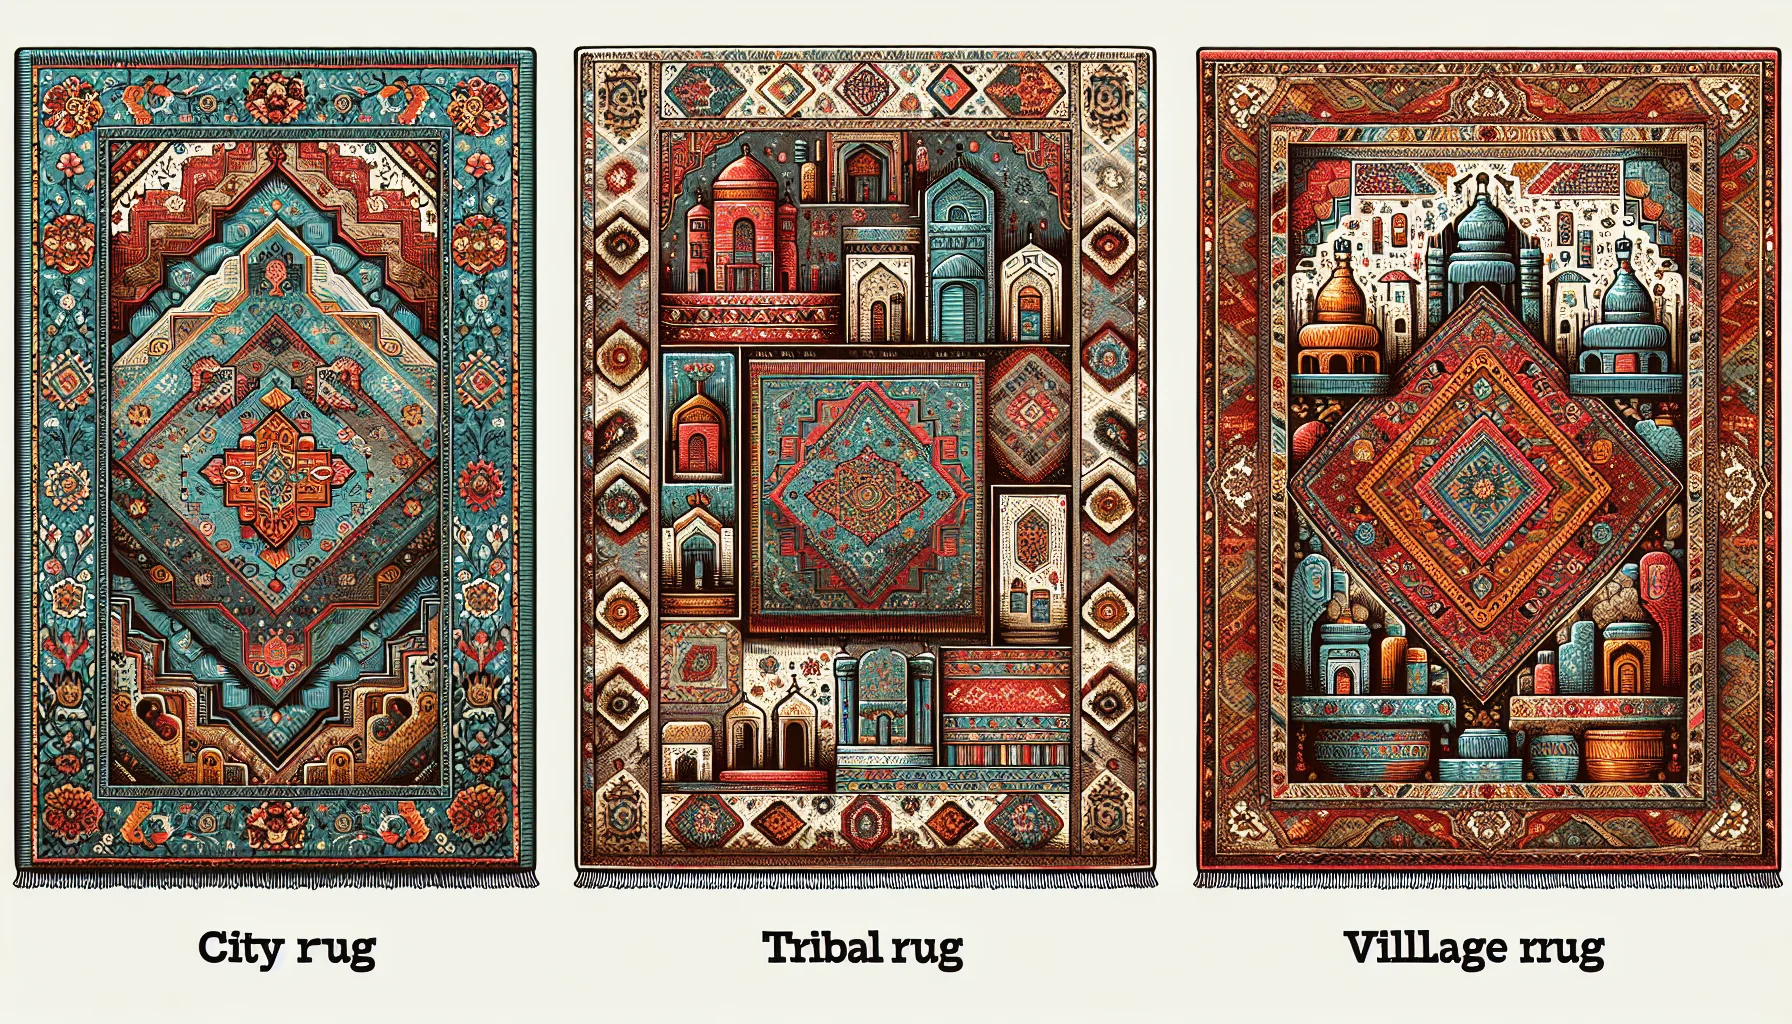 Illustration of various types of Persian rugs